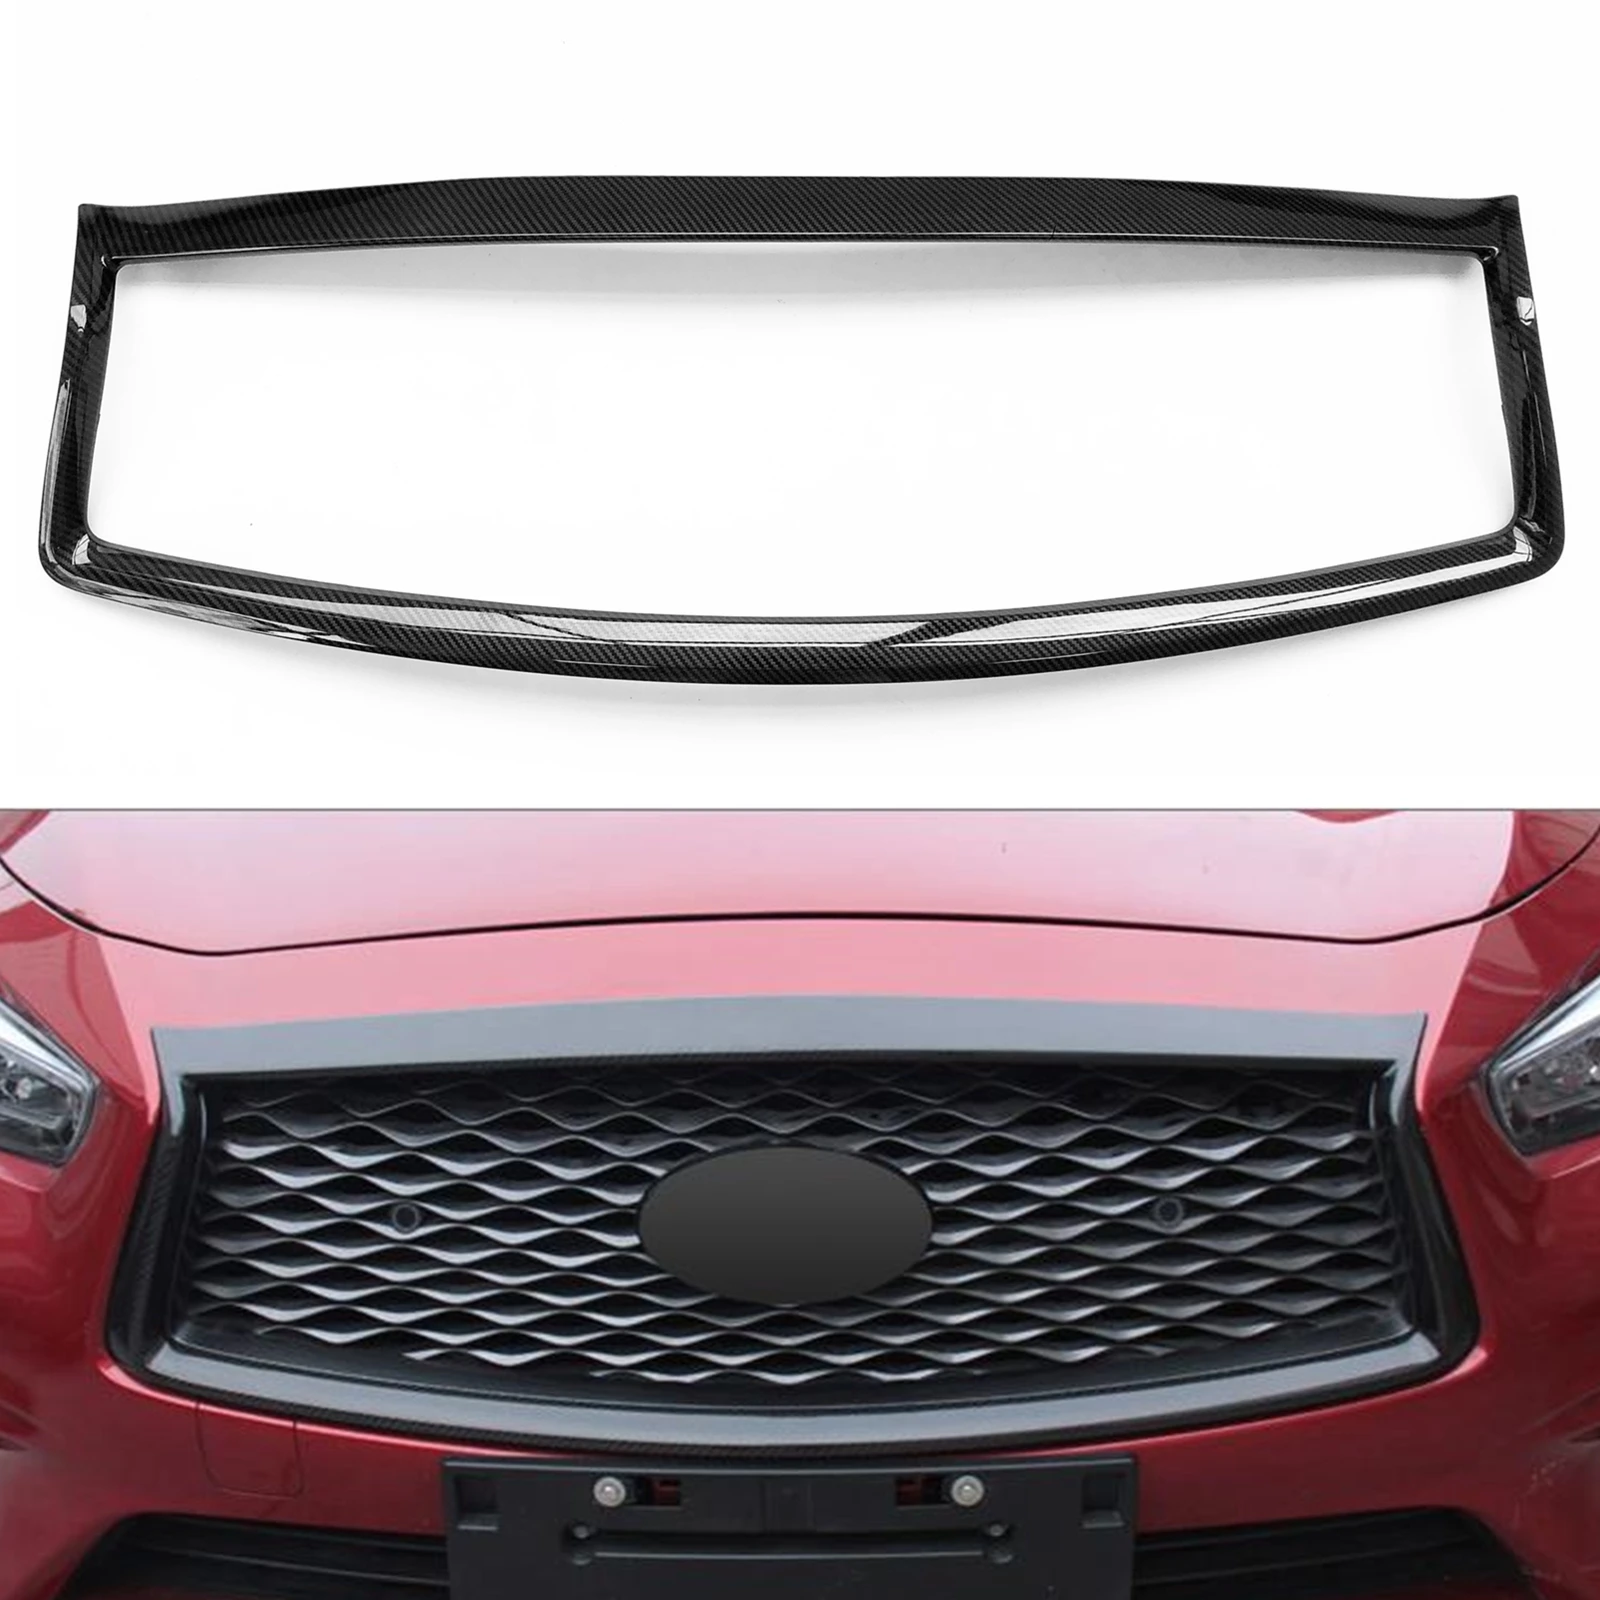 

For Infiniti Q50 2014-2017 Grille Grill Frame Strip Carbon Fiber Look Car Replacement Front Bumper Hood Cover Overlay Bezel Trim